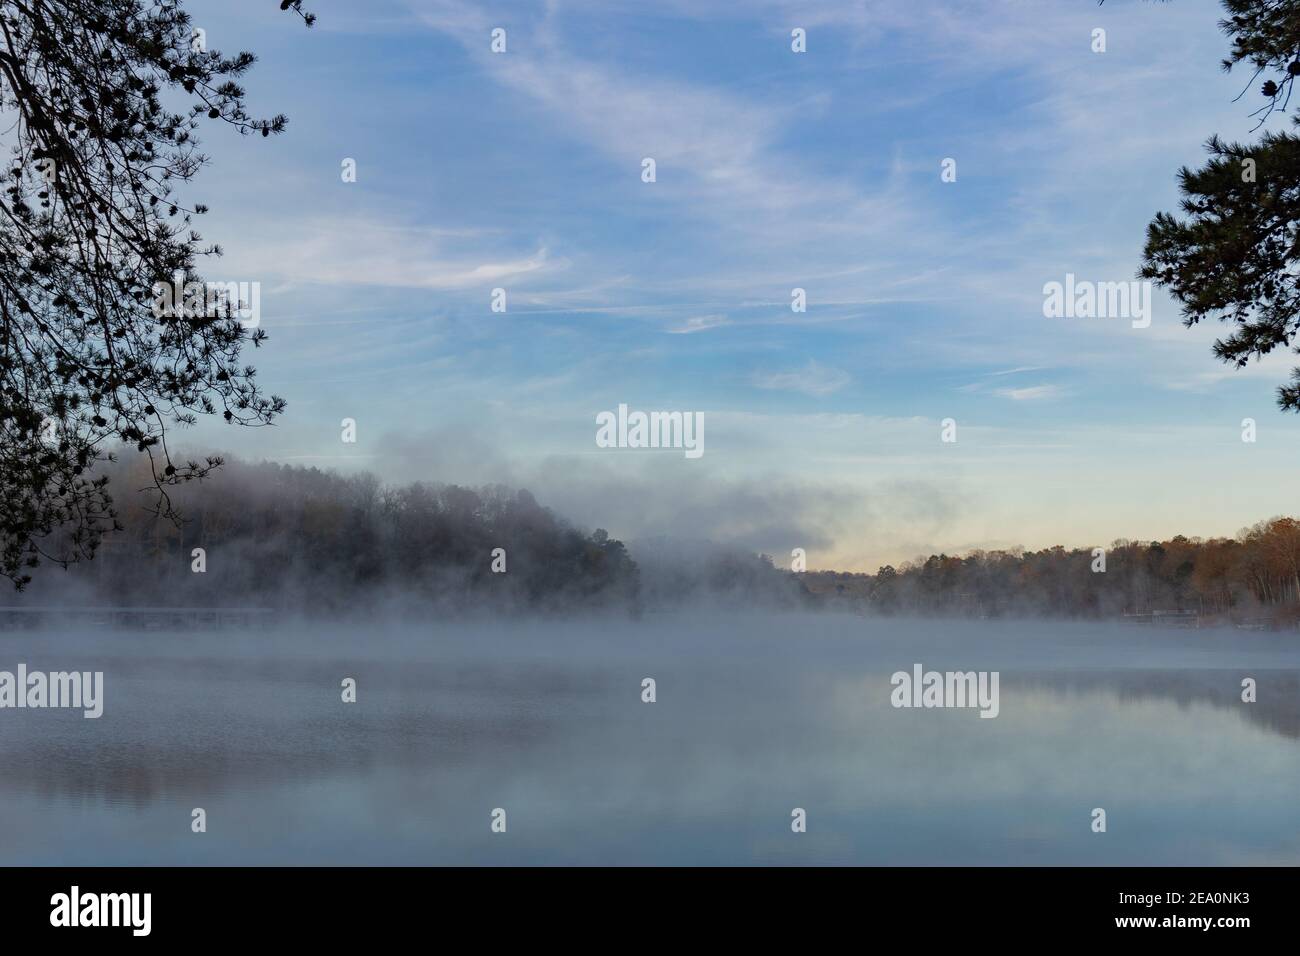 A wall of fog rises on the surface of the water of Lake Lanier in Georgia at dawn in winter framed by trees; landscape view Stock Photo